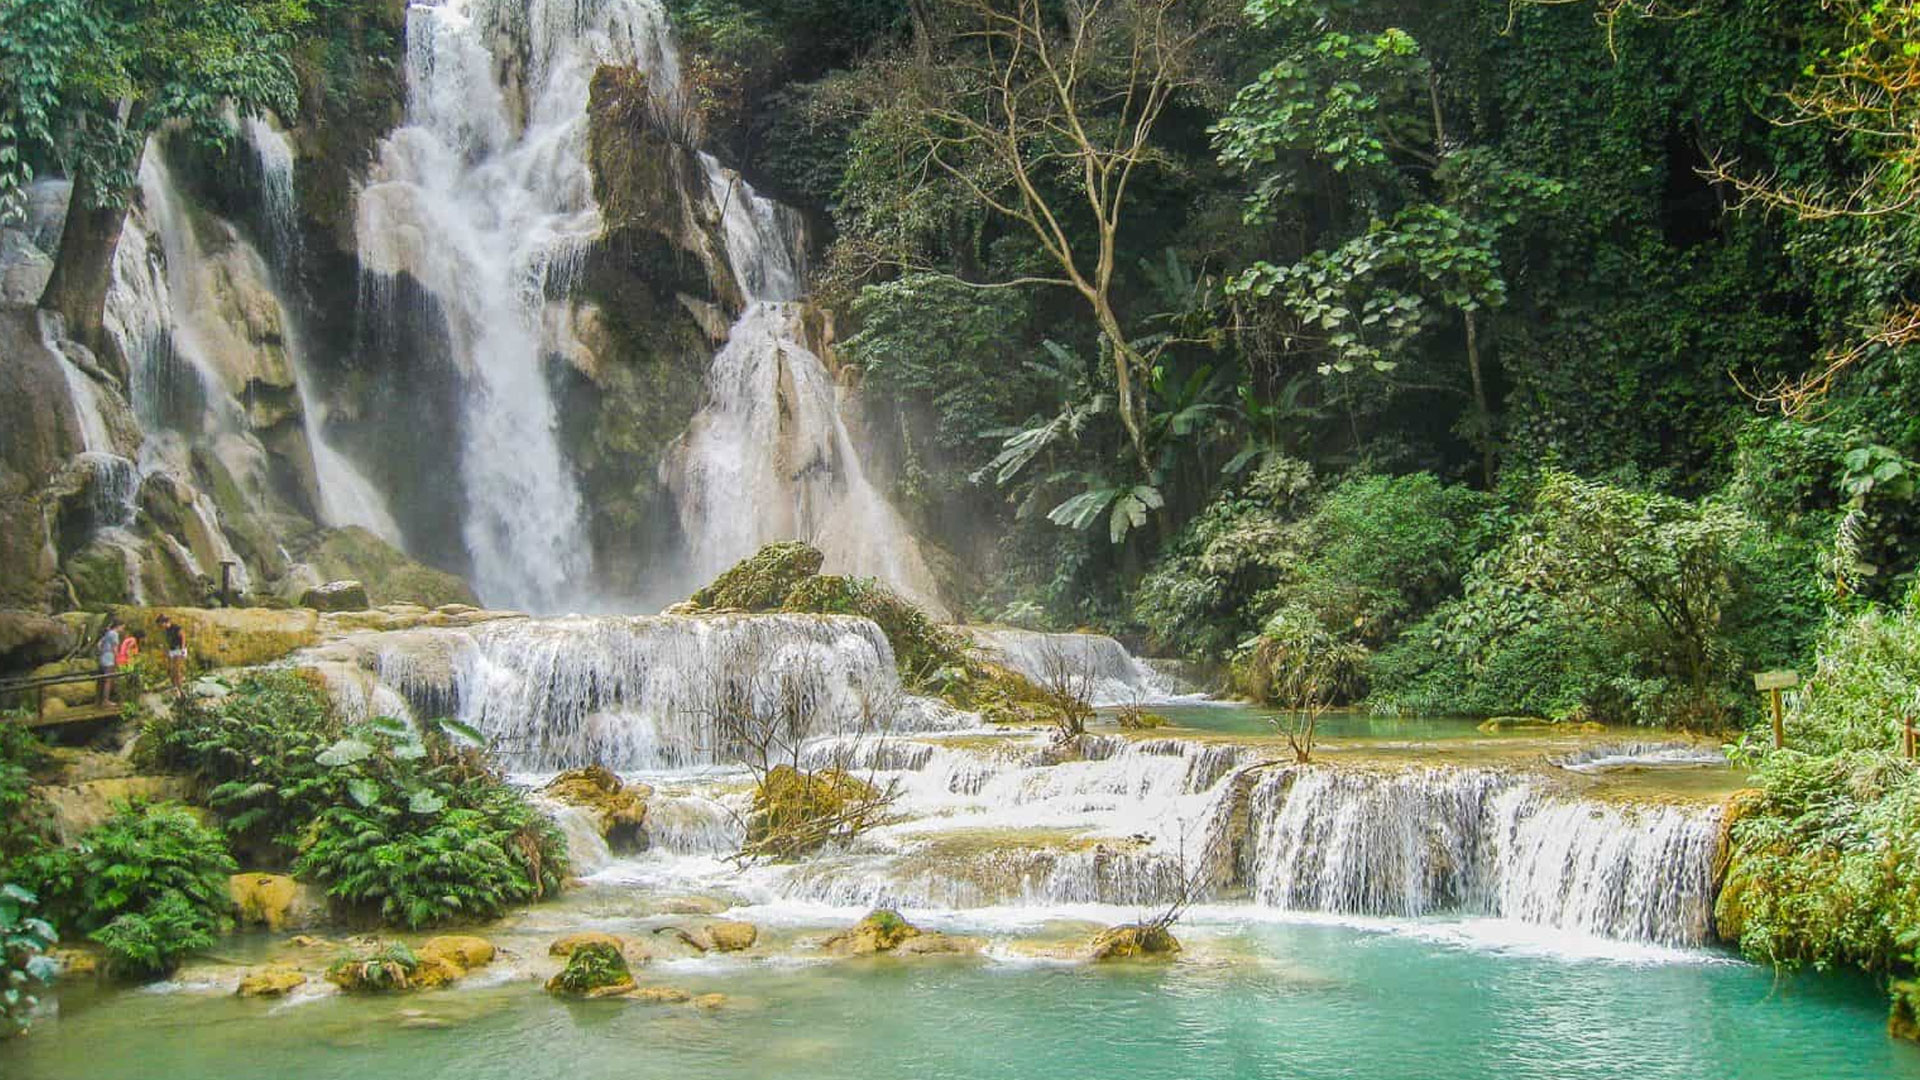 A photo of the stunning Kuang Si Waterfall